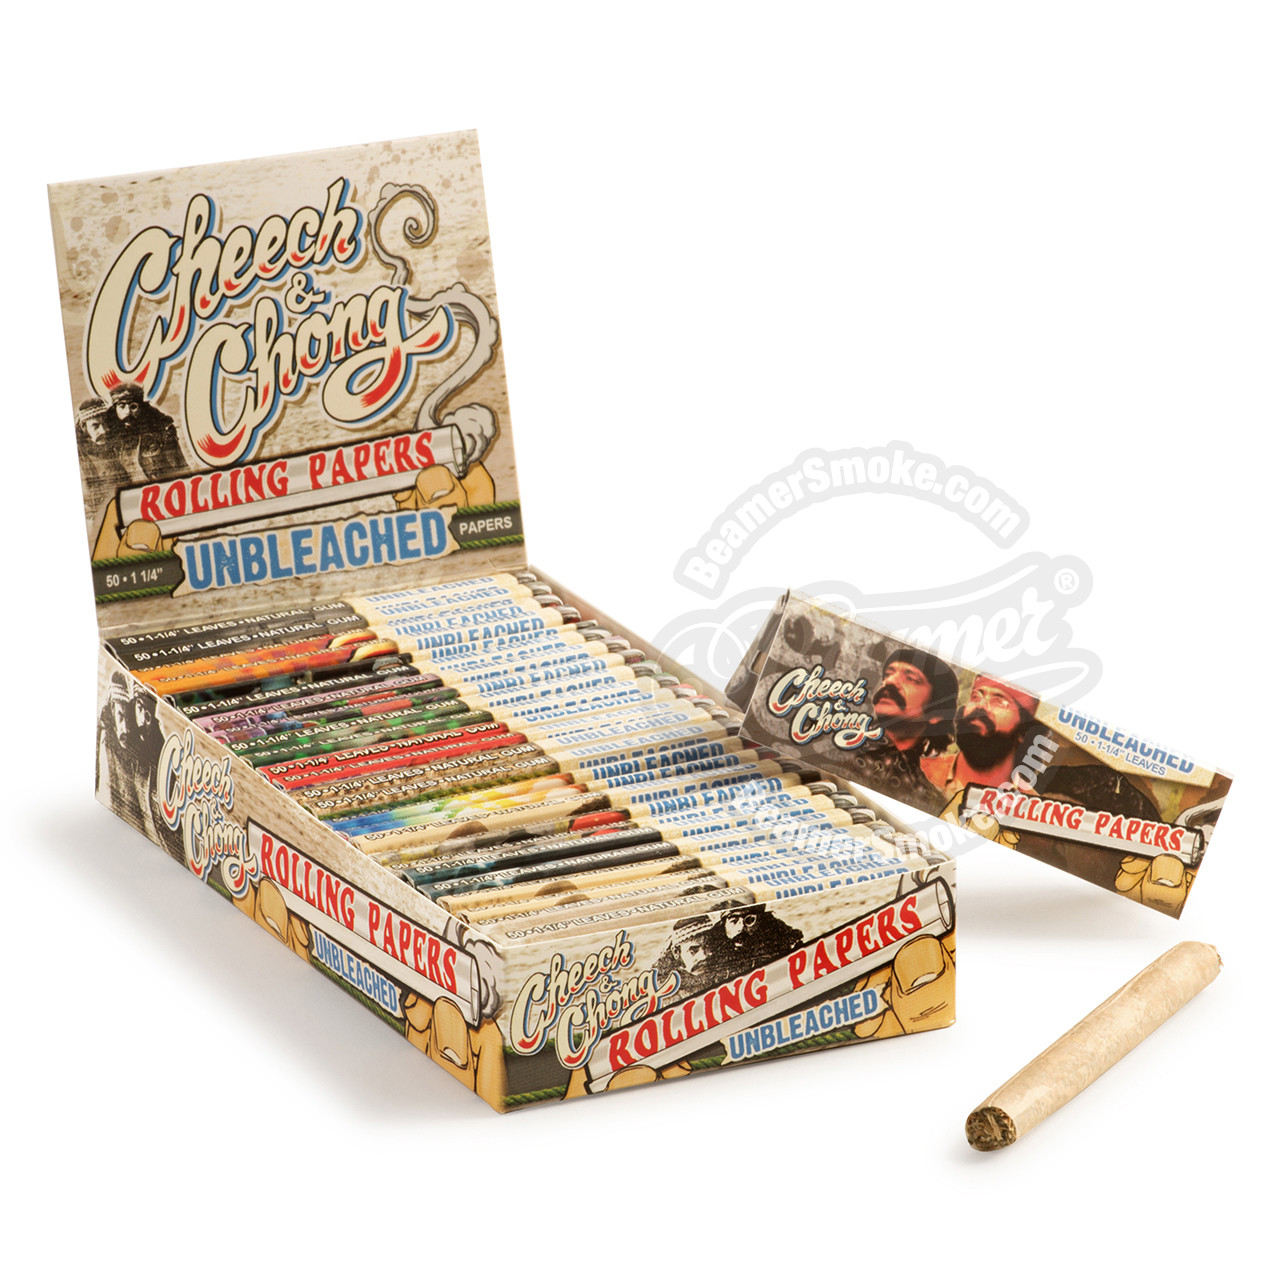 Cheech /& And Chong Unbleached 1 1//4 Rolling Papers 6 packs